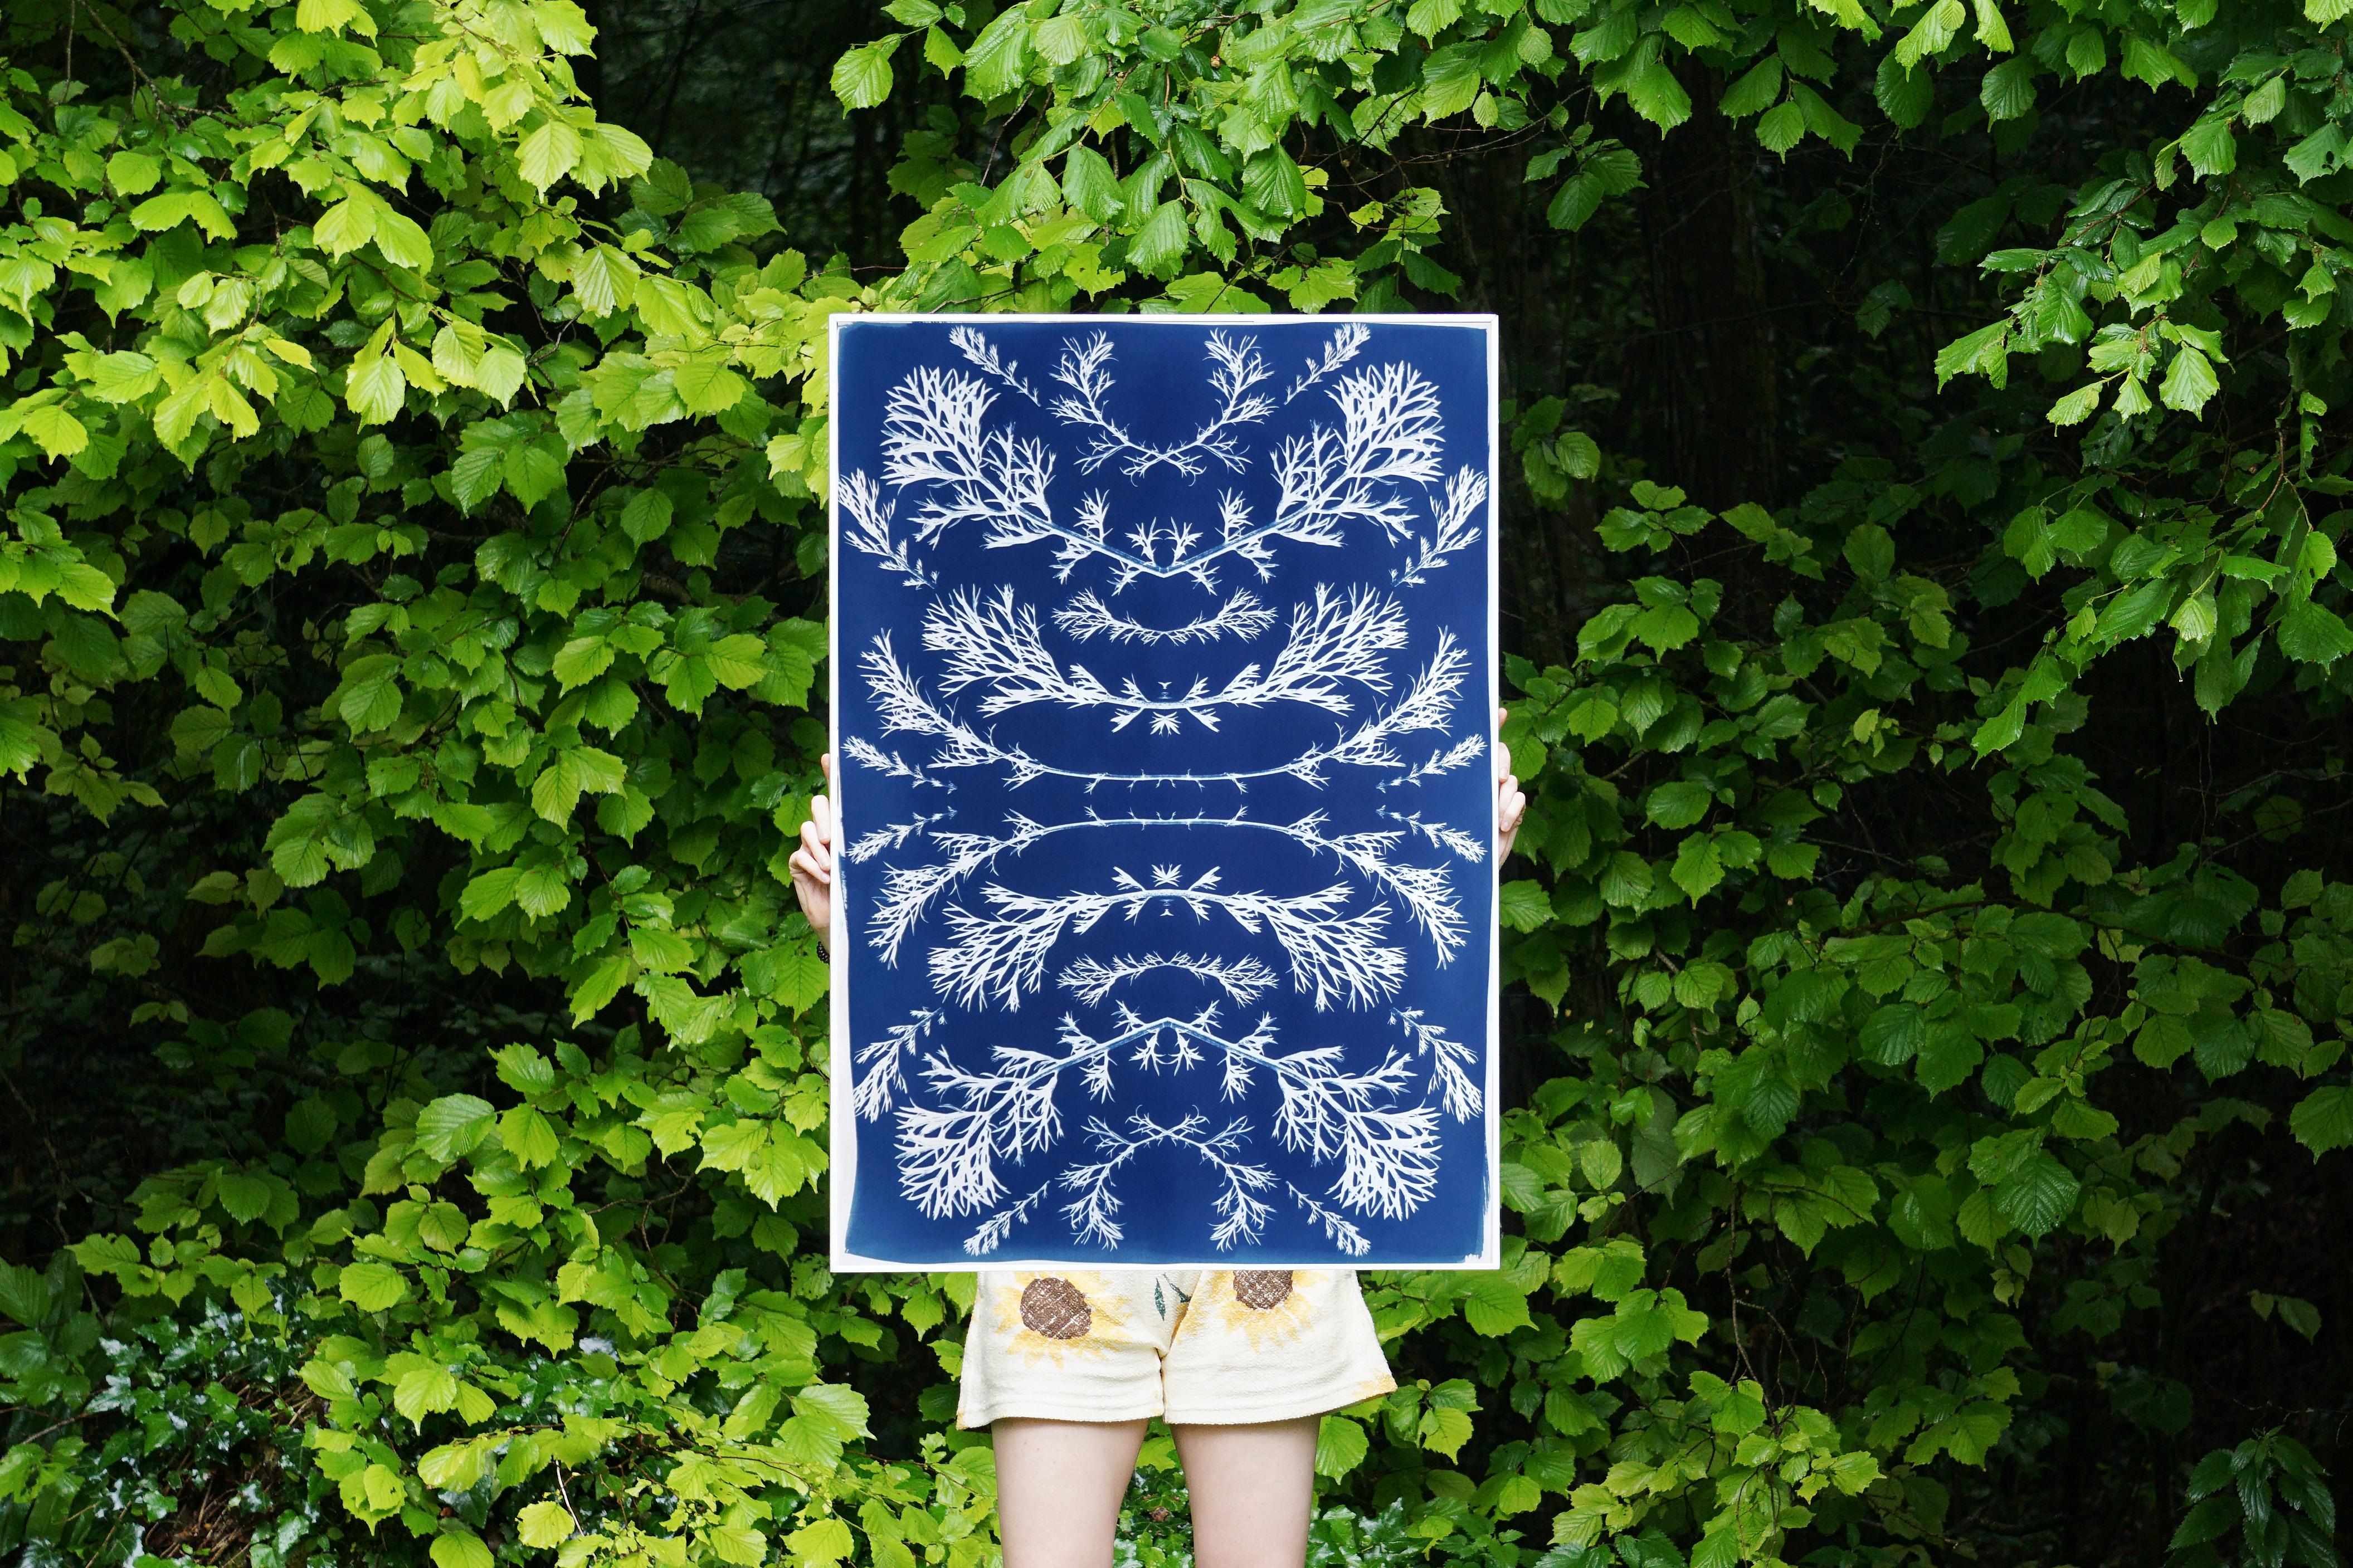 This is an exclusive handprinted limited edition cyanotype.

Details:
+ Title: Vintage Pressed Flowers Nº2
+ Year: 2022
+ Edition Size: 20
+ Stamped and Certificate of Authenticity provided
+ Measurements : 70x100 cm (28x 40 in.), a standard frame